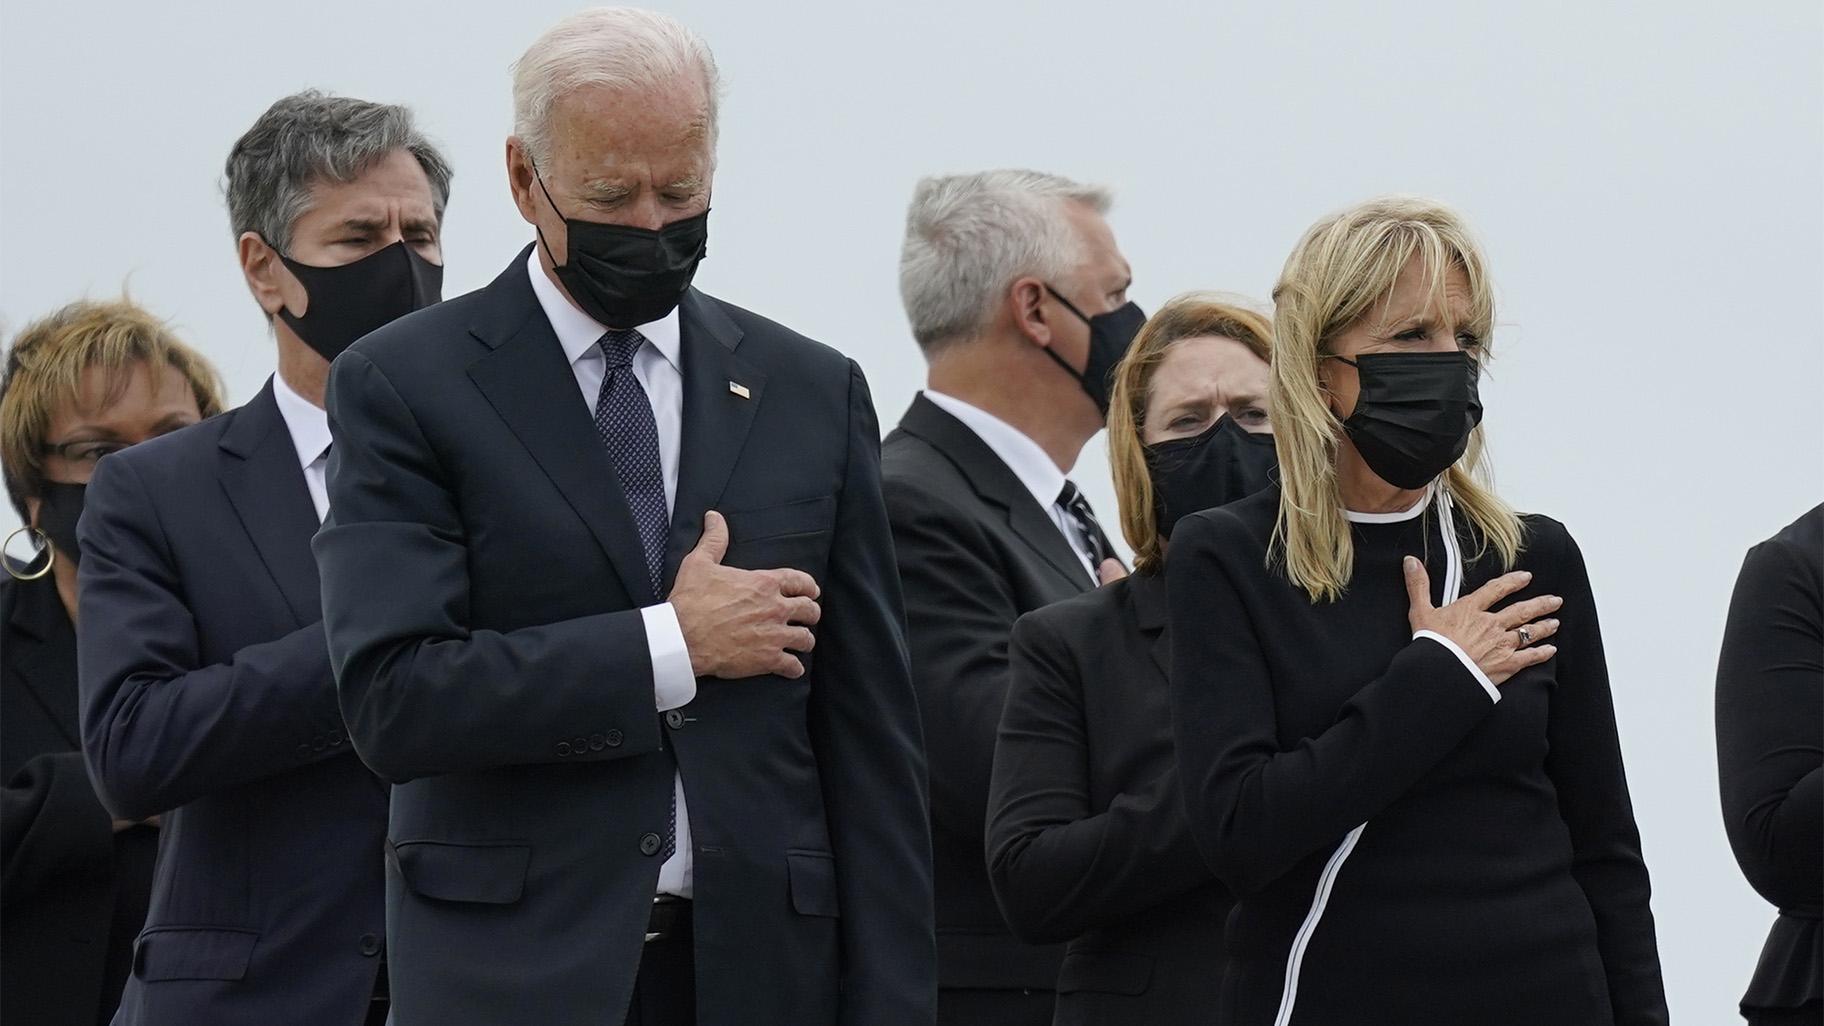 President Joe Biden and first lady Jill Biden watch as a carry team moves the transfer case containing the remains of Navy Corpsman Maxton W. Soviak, 22, of Berlin Heights, Ohio, during a casualty return Sunday, Aug. 29, 2021, at Dover Air Force Base, Del. (AP Photo / Carolyn Kaster)